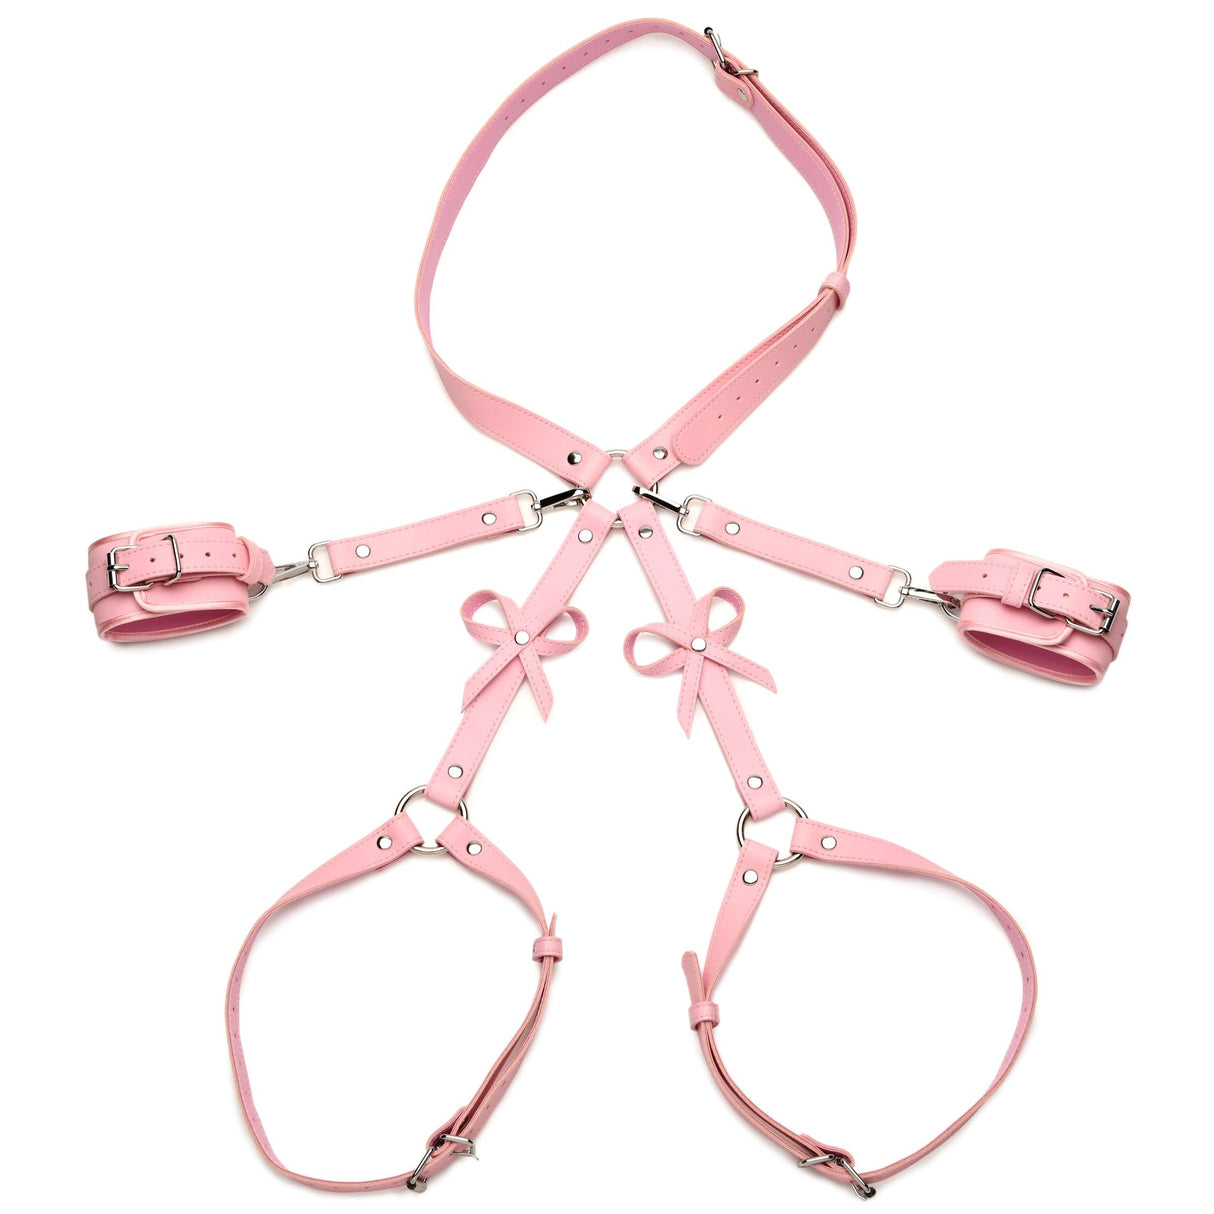 Strict Bondage Thigh Harness with Bows - Pink